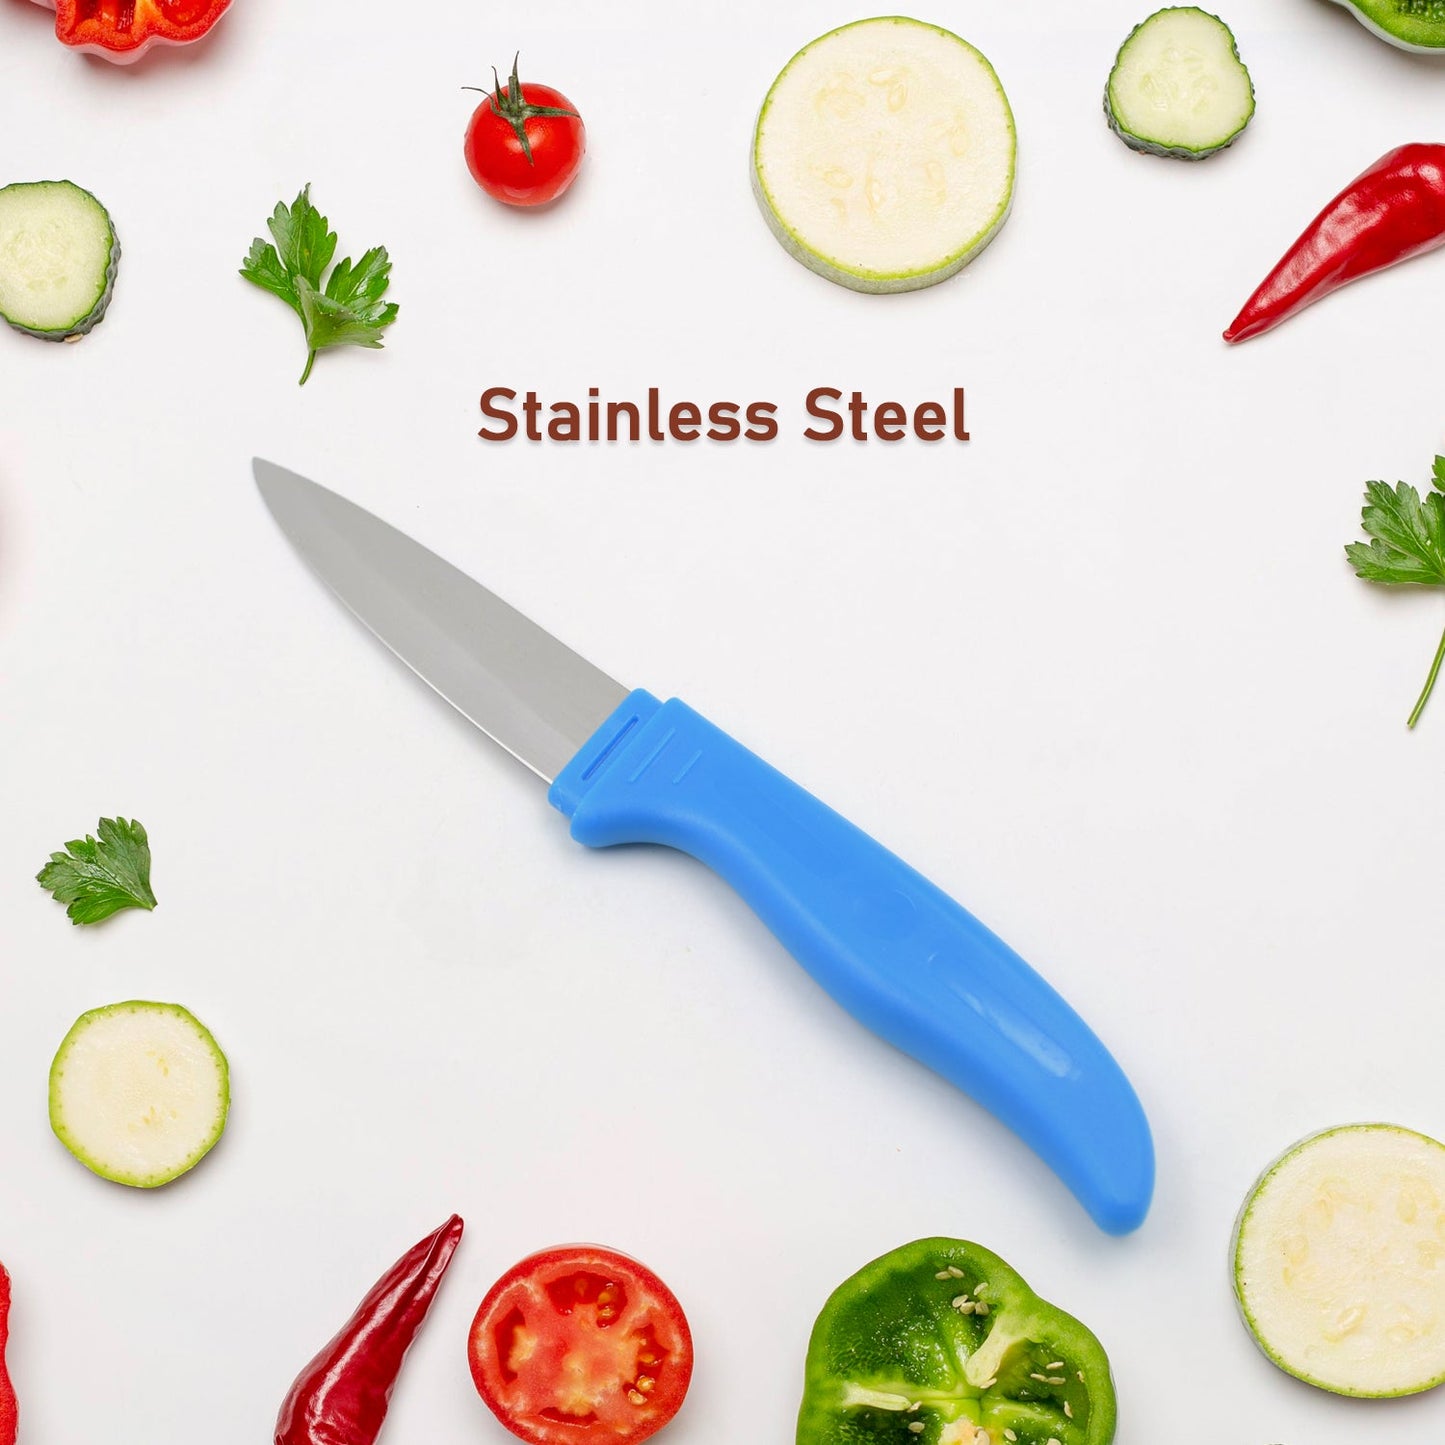 5834 Stainless Steel Knife For Kitchen Use, Knife Set, Knife & Non-Slip Handle With Blade Cover Knife, Fruit, Vegetable,Knife Set (1 Pc)